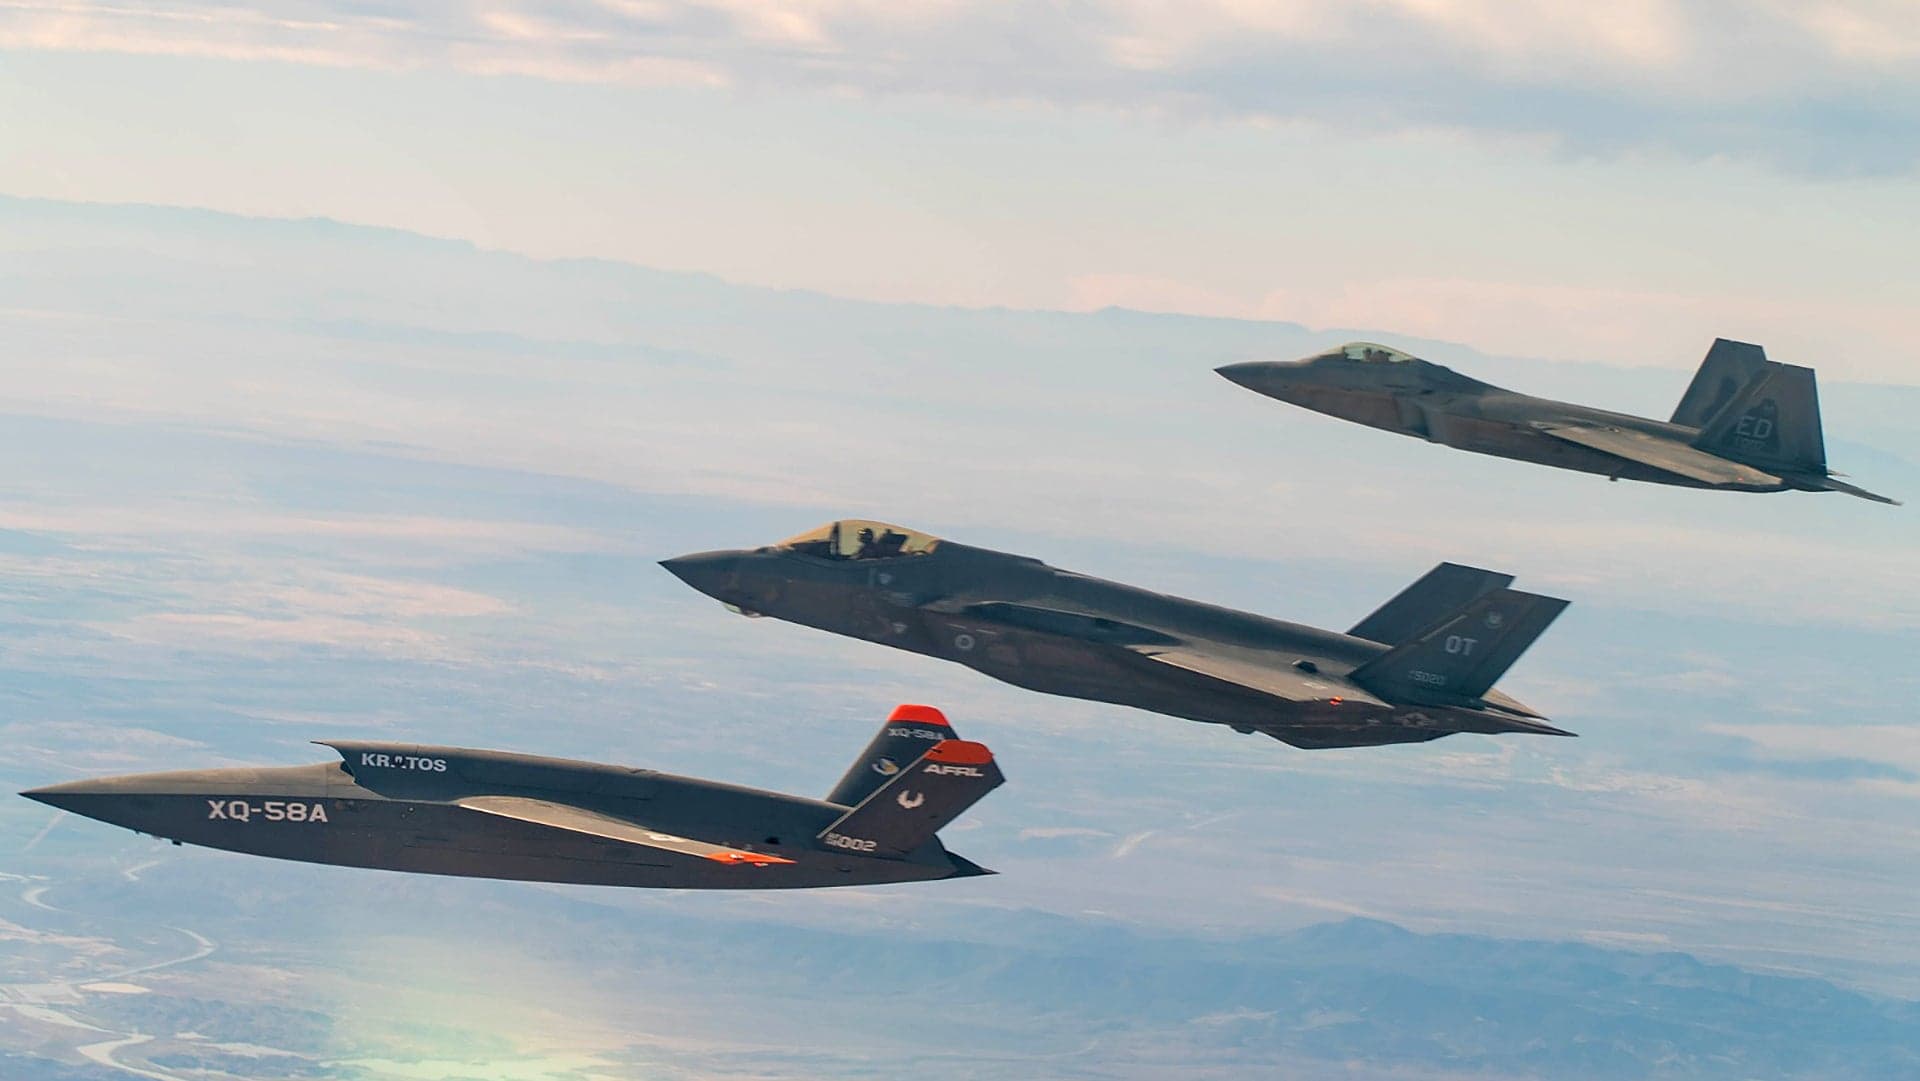 Stealthy XQ-58 Drone Busts The Networking Logjam Between F-22 And F-35